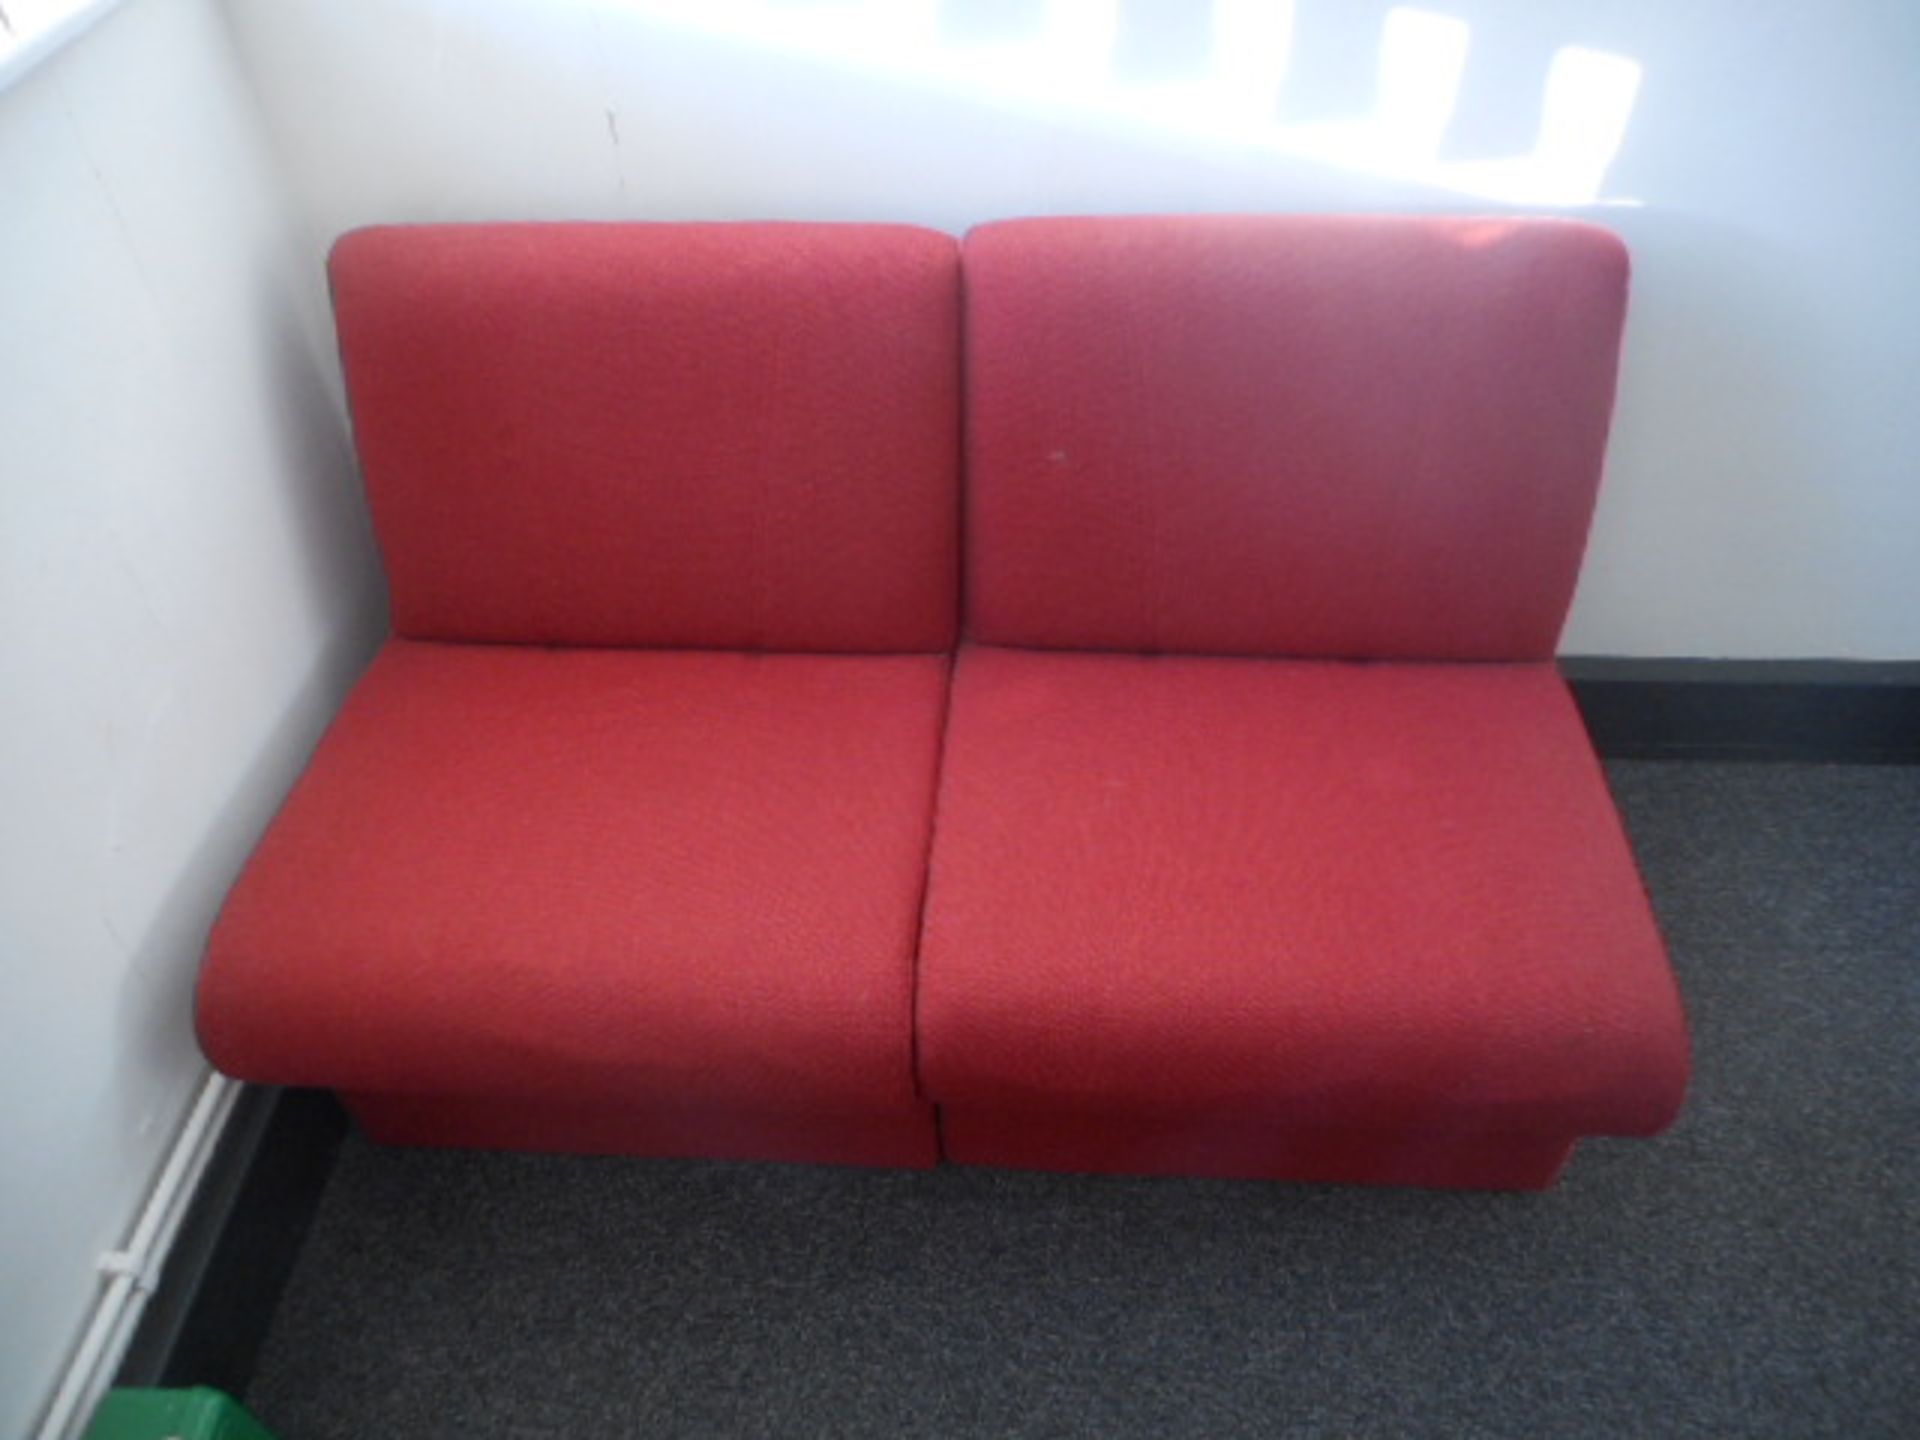 2 x RED ARMCHAIRS 2 X RED CHAIRS 1 x MATCHING RED TABLE 2 x BLACK CHAIRS and 1 x METAL COAT STAND - Image 2 of 4